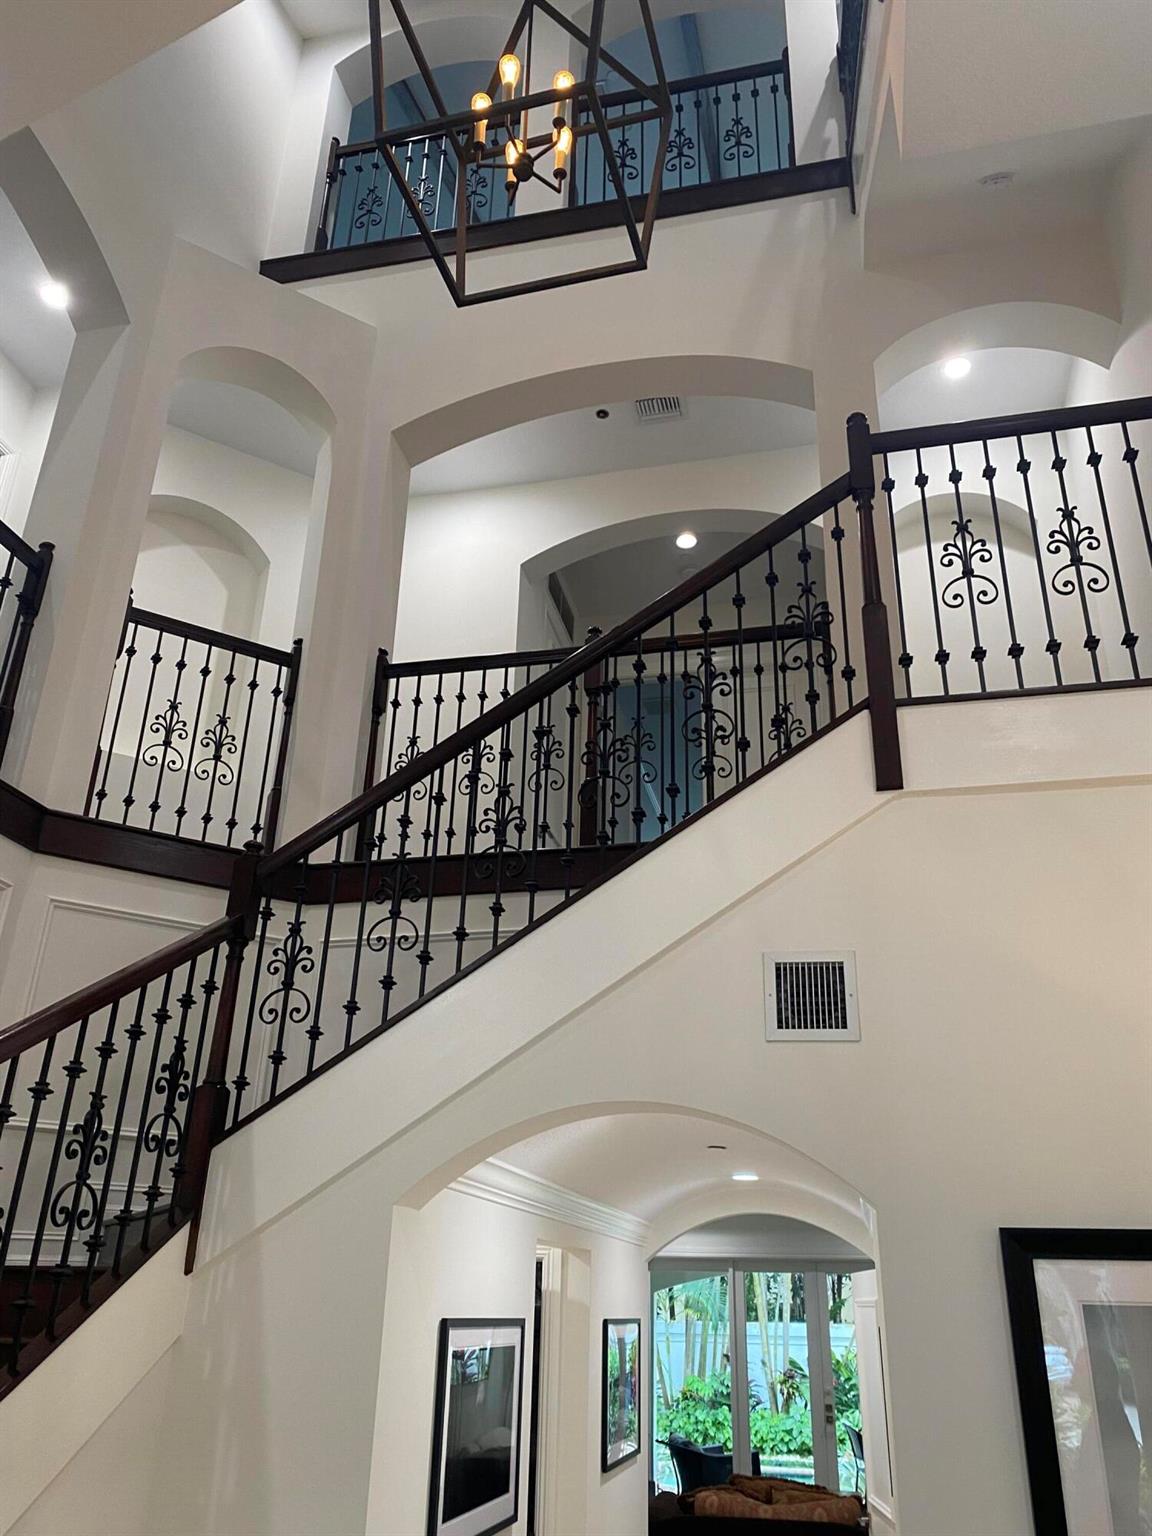 Estuary is a great gated community- well located - 3 story house is well appointed and ready to move into. The Estuary is a manned gated community of only 104 homes and is located a mere 1 mile to the beach making it the only manned gated East Delray Beach waterfront.